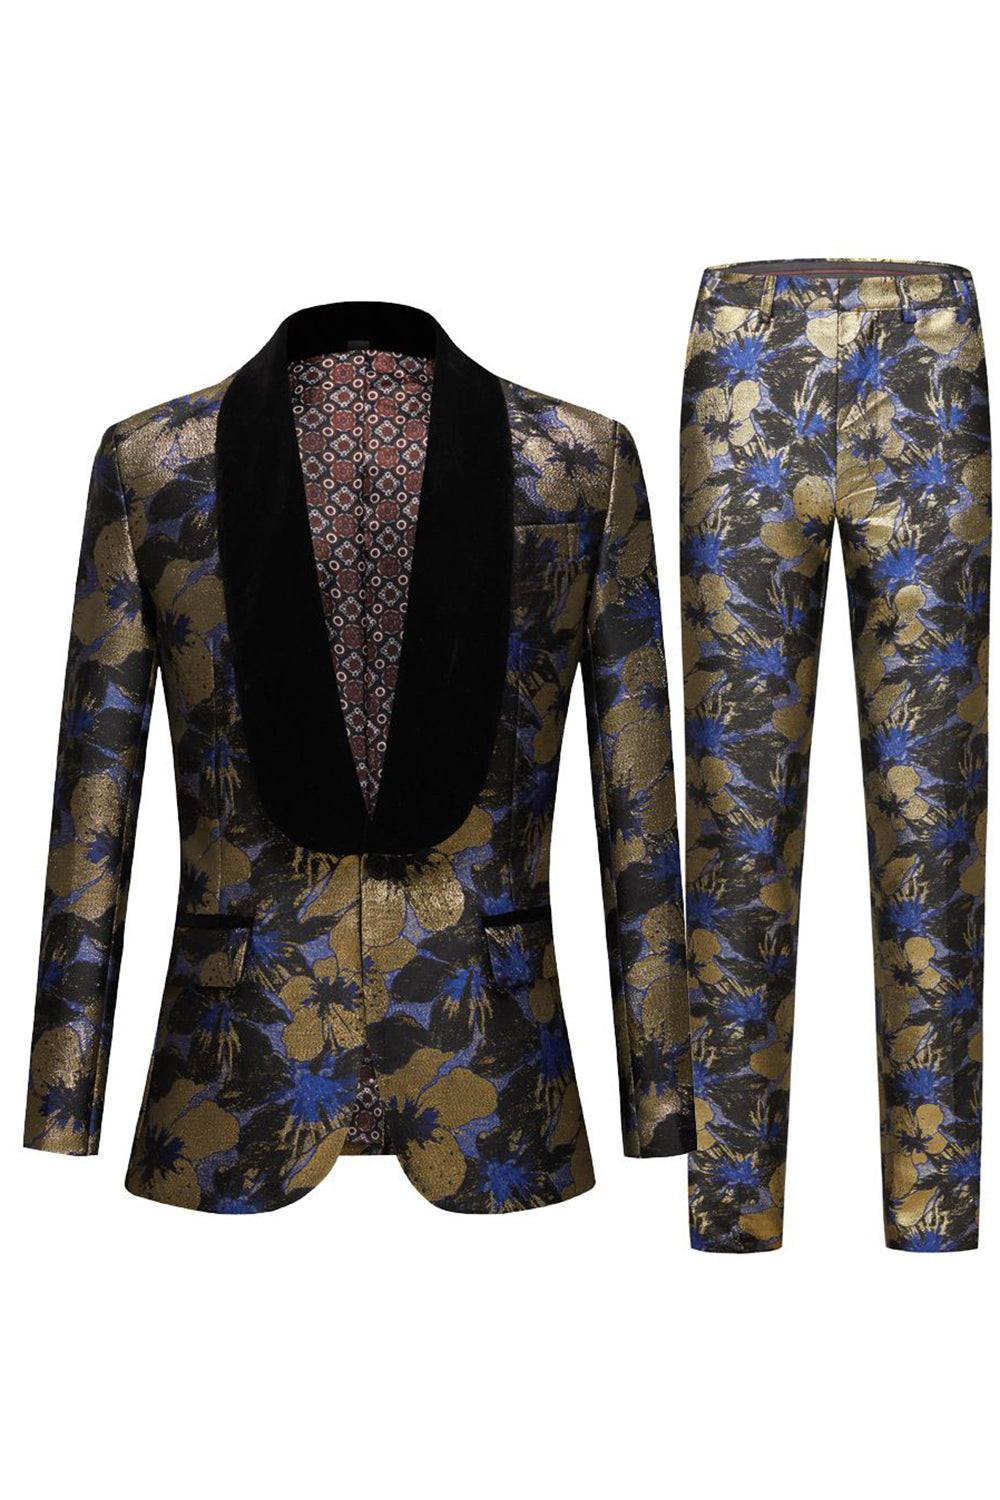 Blauwe Jacquard Shawl Revers Heren 2 Delige Prom Suits